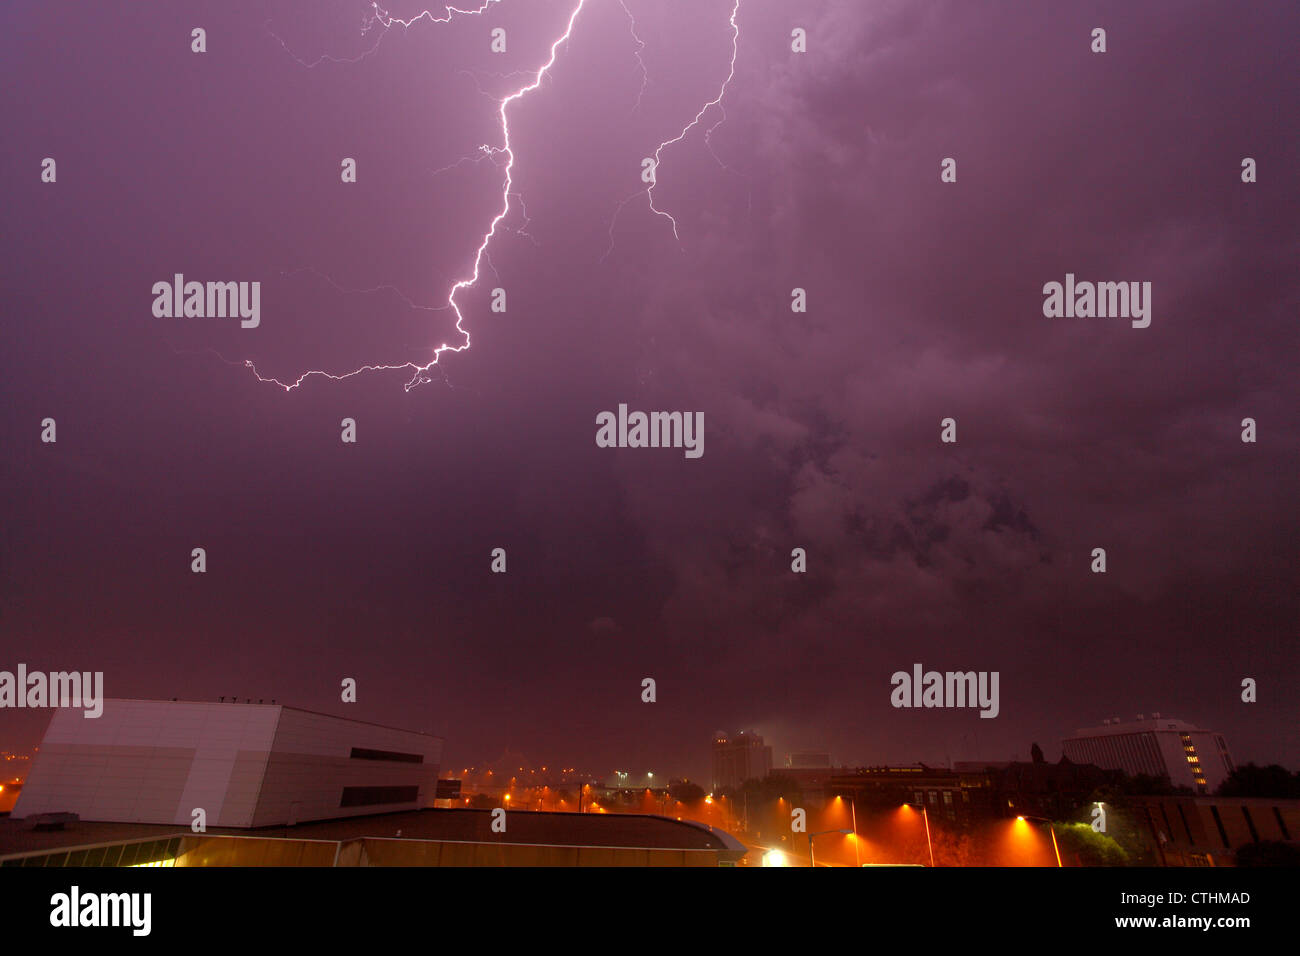 Lightning illuminates the sky purple during a thunderstorm over a city, accompanied by heavy rain and haze (visible in lower). Stock Photo